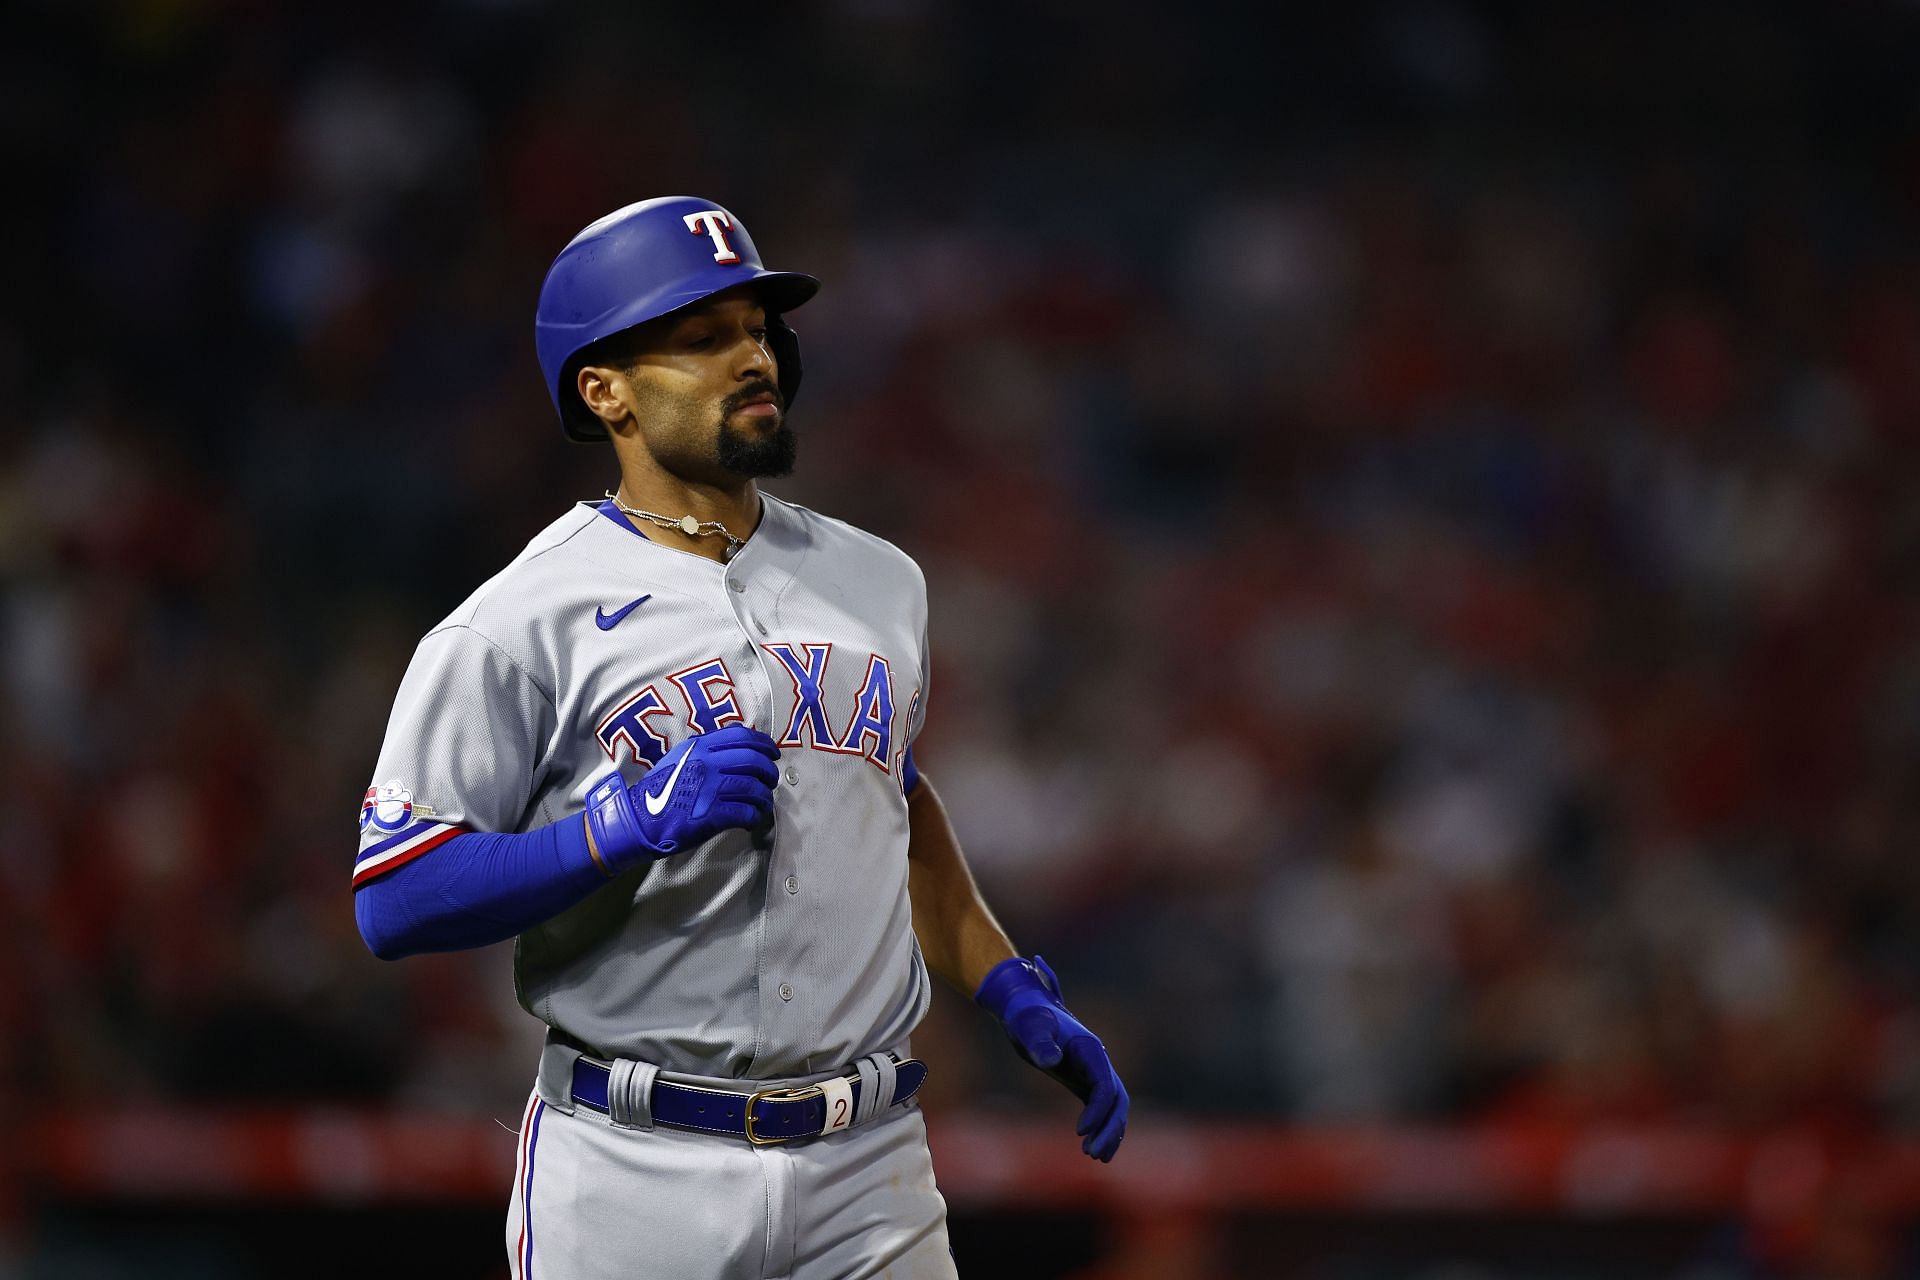 Texas Rangers infielder Marcus Semien cost his team a run with some poor fielding in the bottom of the seventh inning against the Cleveland Guardians on Tuesday